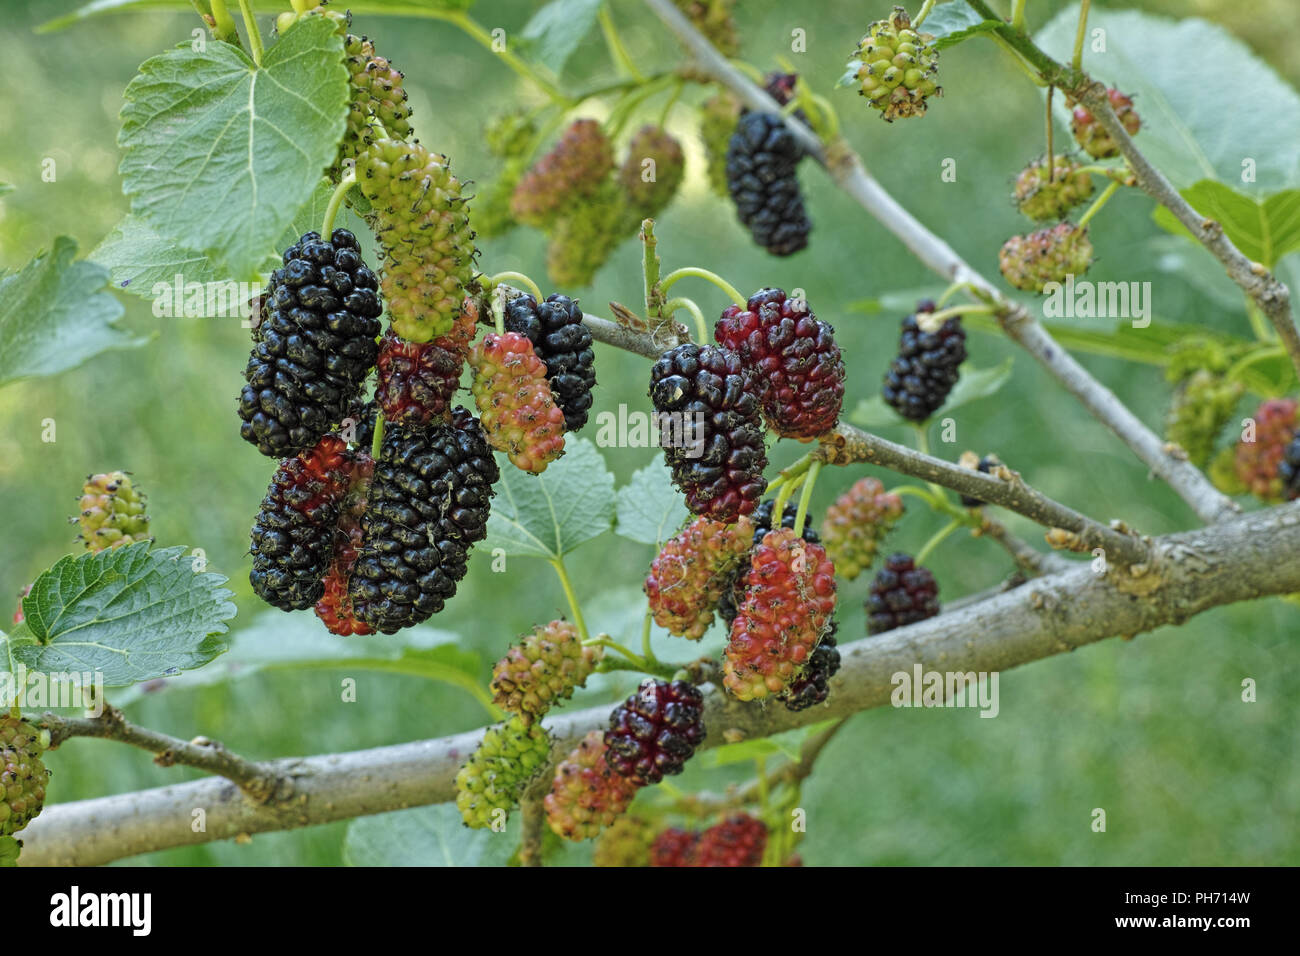 a branch with some ripe and unripe fruits of mulberry, morus nigra Stock Photo